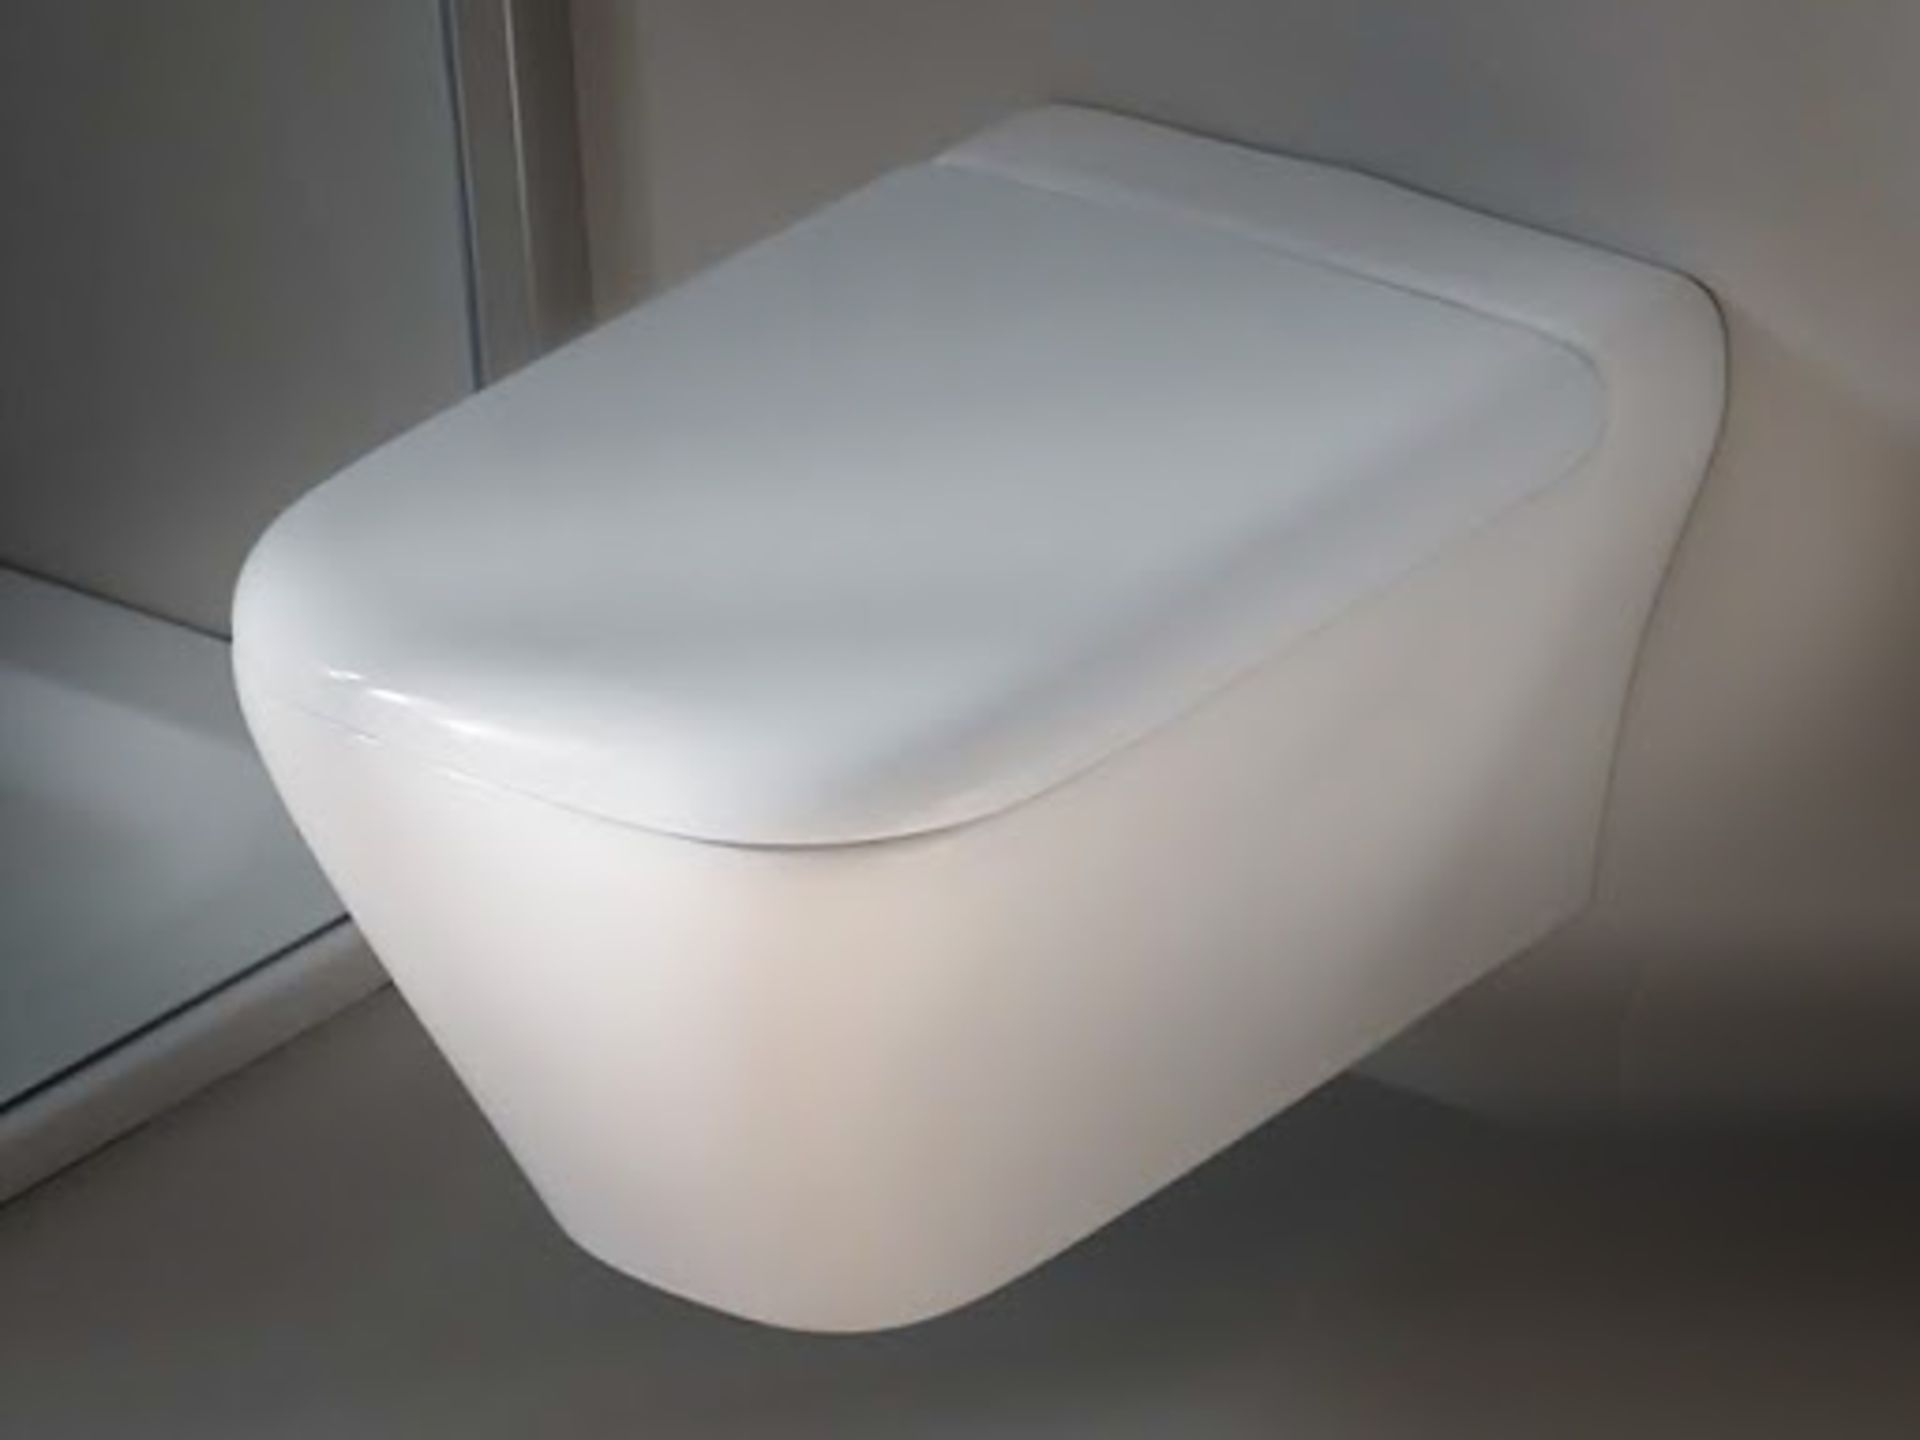 (PC134) Myday Wall Hung 540mm Toilet. RRP £379.99. The myDay bathroom series from Keramag, is ...(